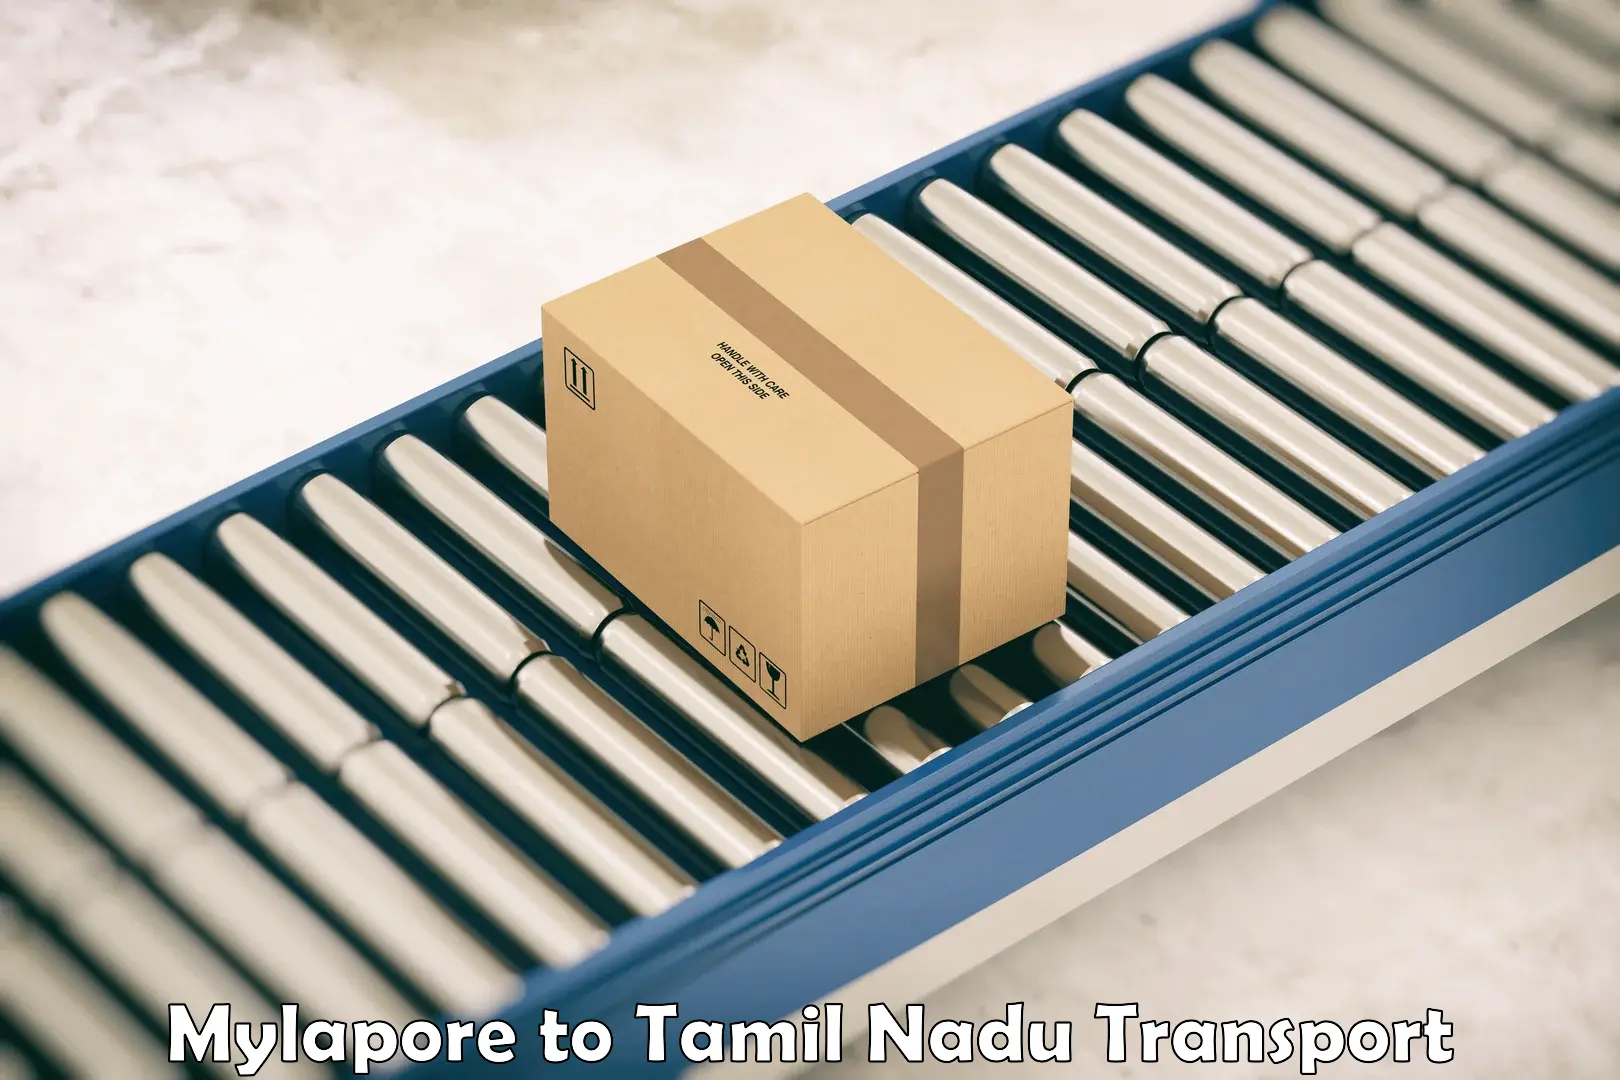 Shipping services Mylapore to The Gandhigram Rural Institute